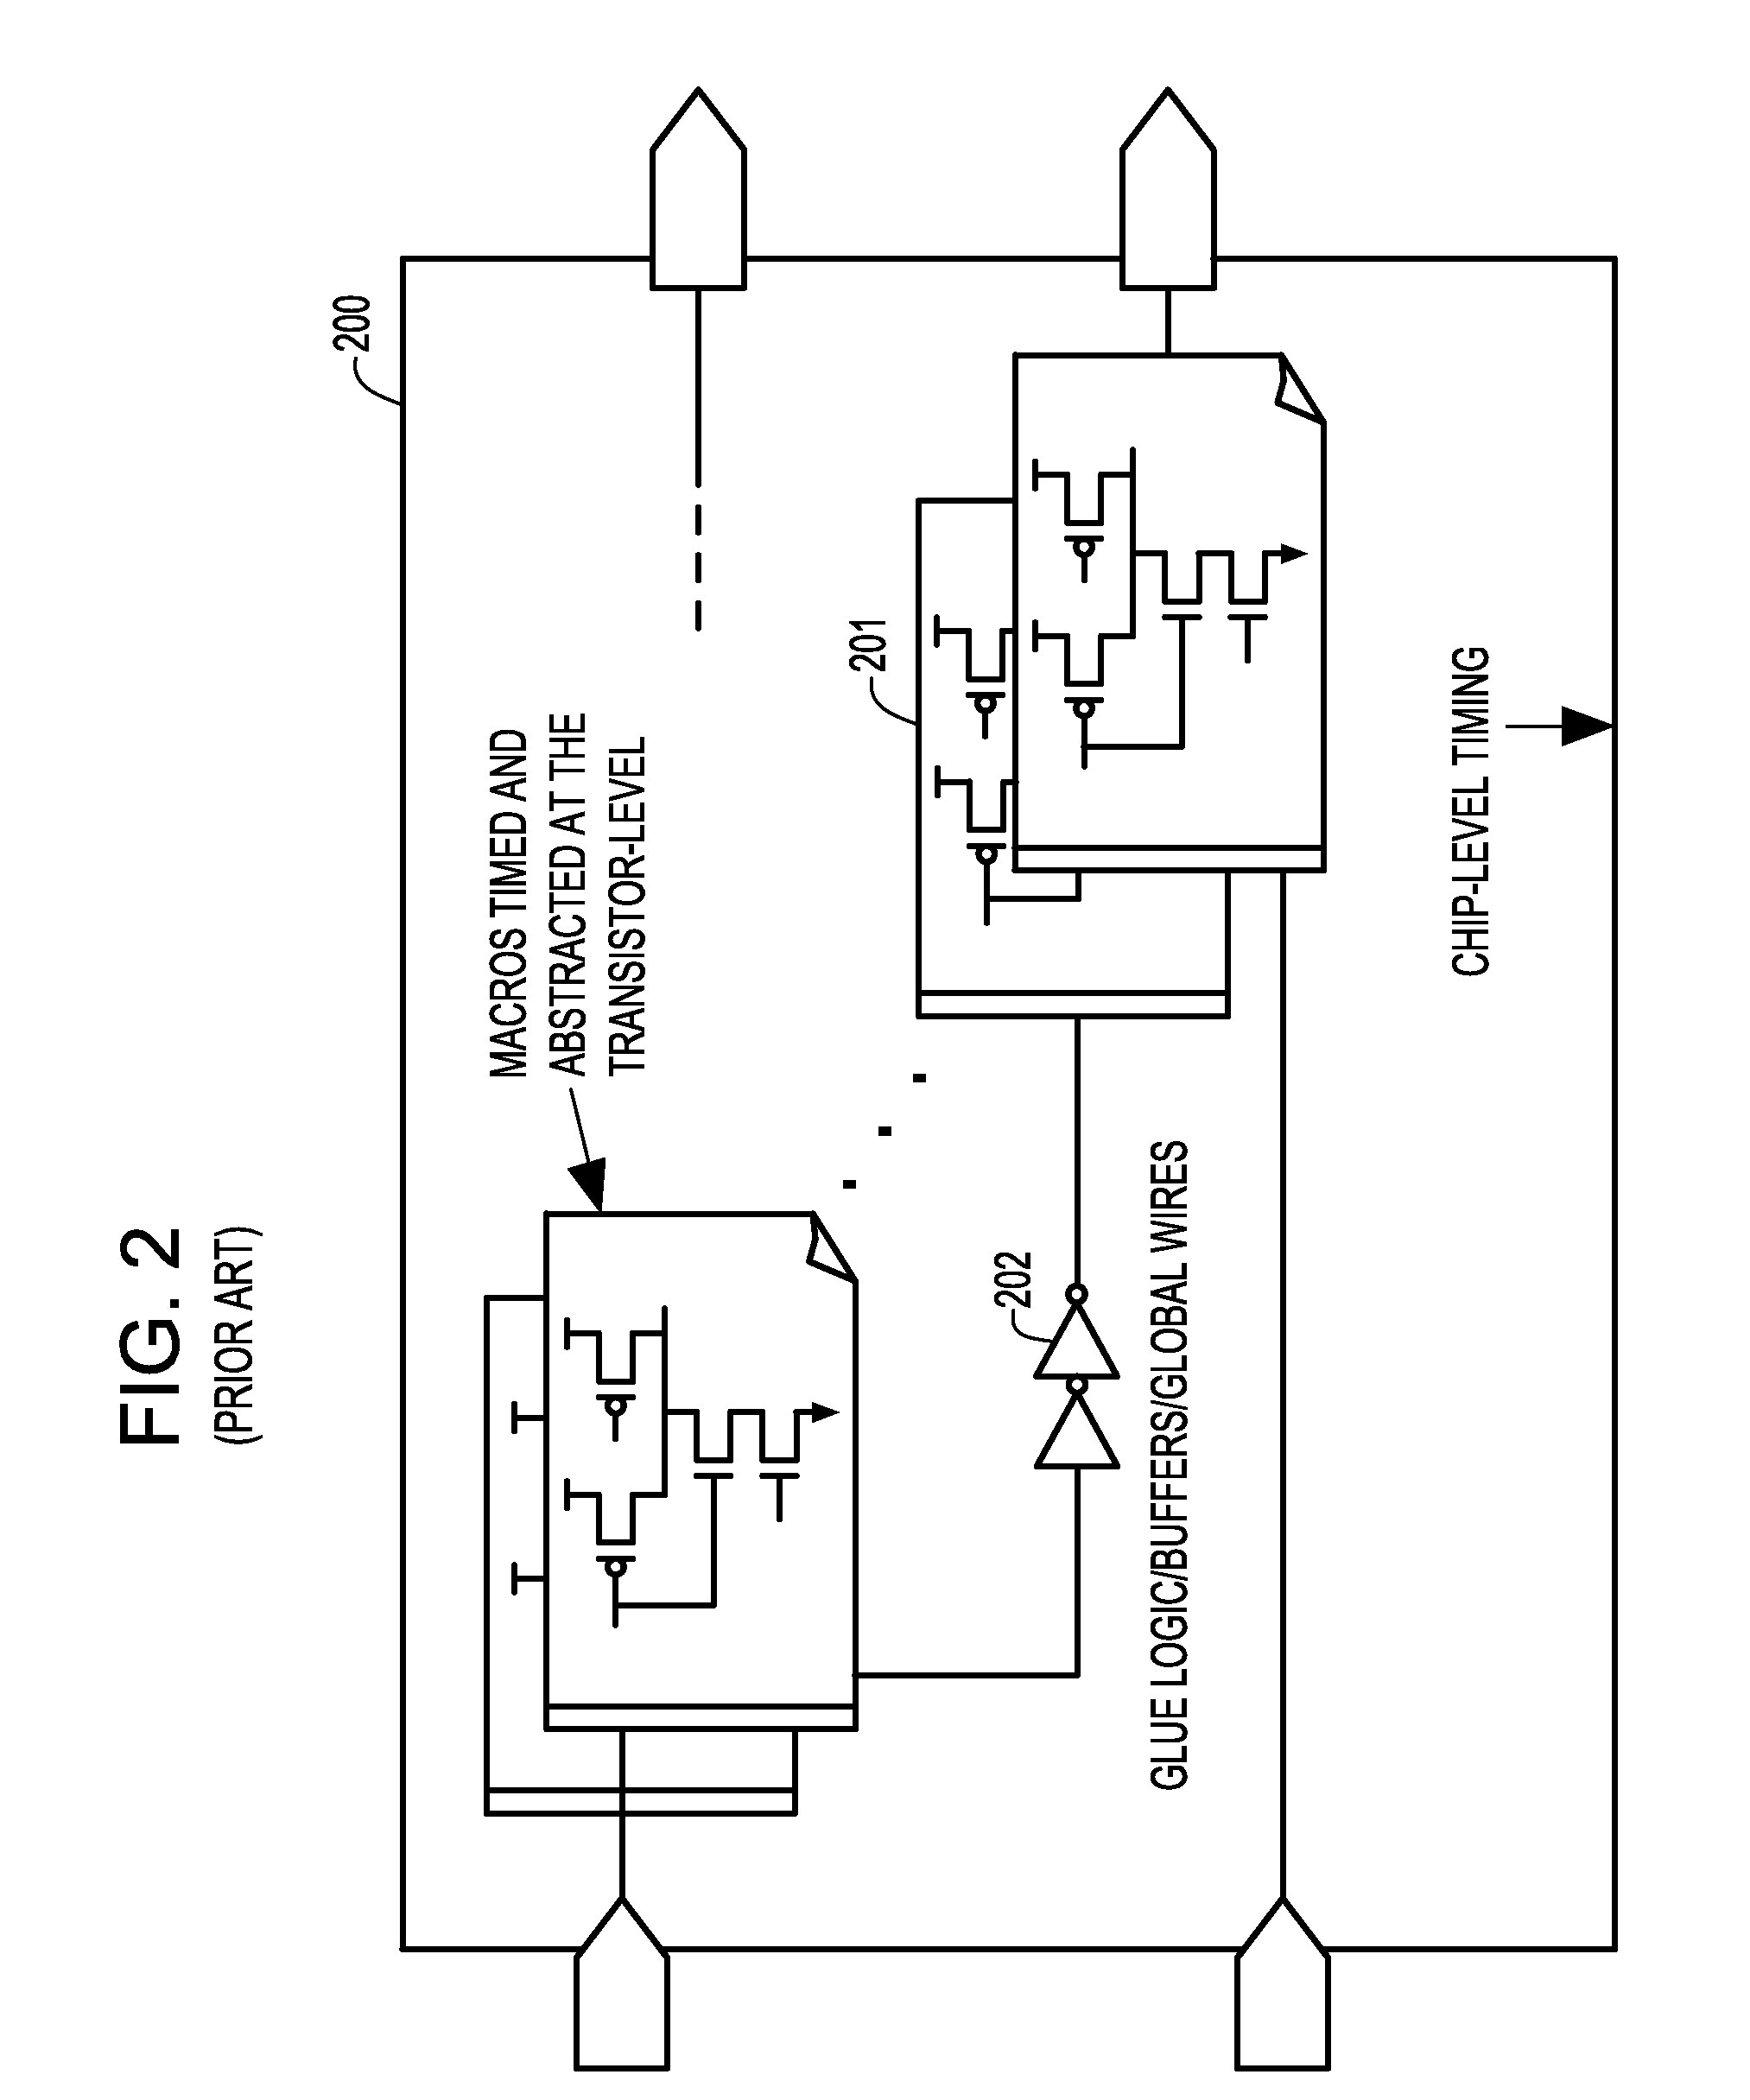 Method of employing slew dependent pin capacitances to capture interconnect parasitics during timing abstraction of VLSI circuits